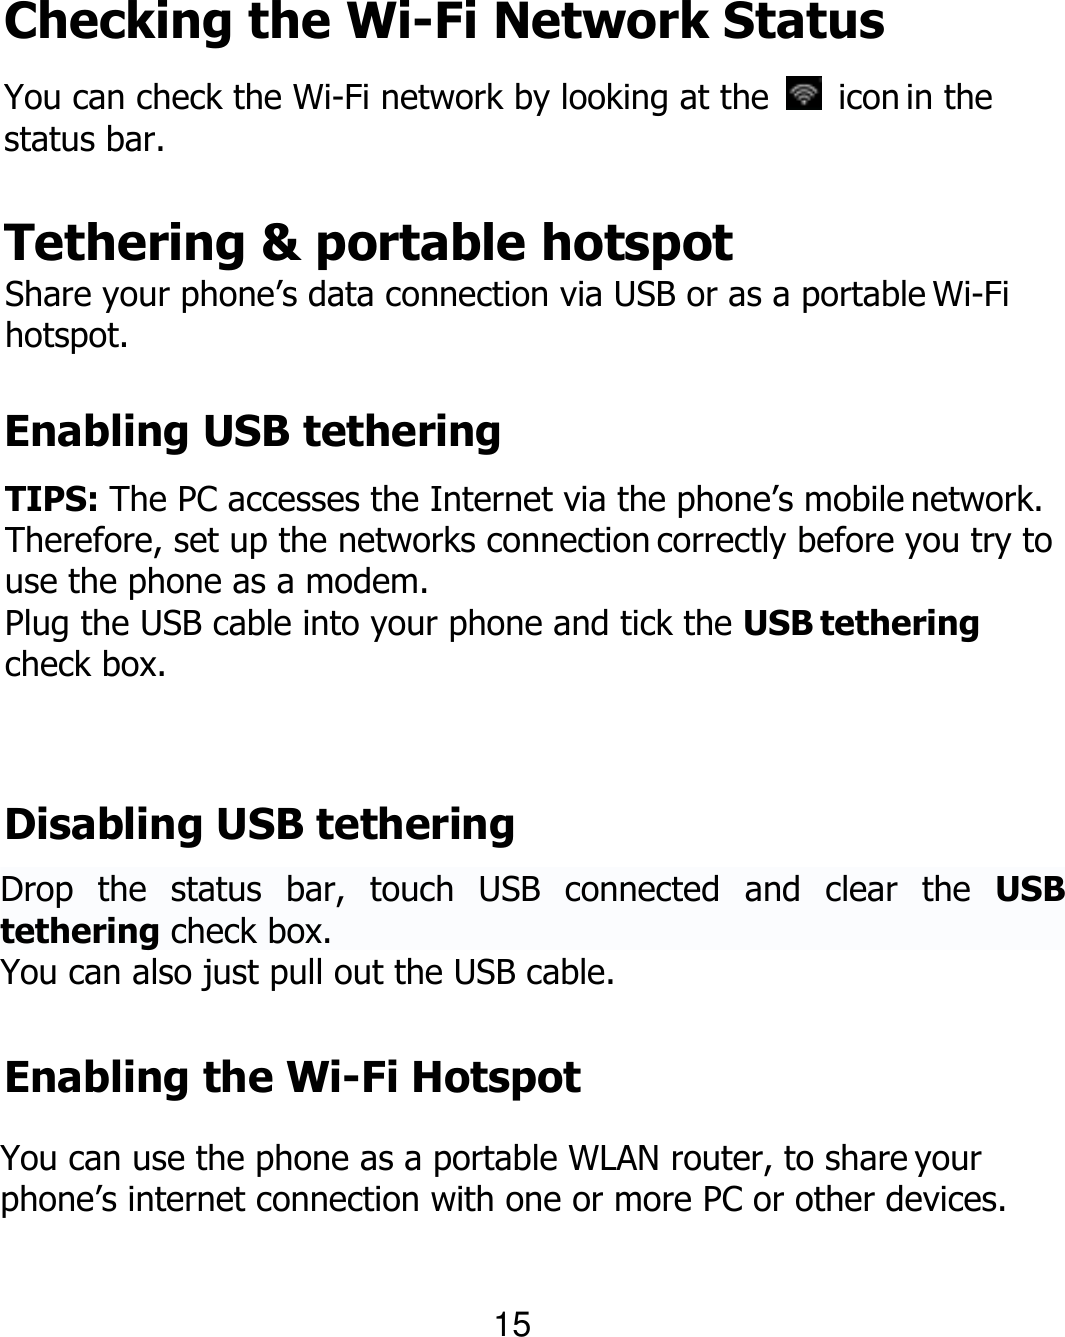 Checking the Wi-Fi Network Status You can check the Wi-Fi network by looking at the    icon in the status bar. Tethering &amp; portable hotspot Share your phone’s data connection via USB or as a portable Wi-Fi hotspot. Enabling USB tethering TIPS: The PC accesses the Internet via the phone’s mobile network. Therefore, set up the networks connection correctly before you try to use the phone as a modem. Plug the USB cable into your phone and tick the USB tethering check box. Disabling USB tethering Drop  the  status  bar,  touch  USB  connected  and  clear  the  USB tethering check box. You can also just pull out the USB cable. Enabling the Wi-Fi Hotspot You can use the phone as a portable WLAN router, to share your phone’s internet connection with one or more PC or other devices. 15 